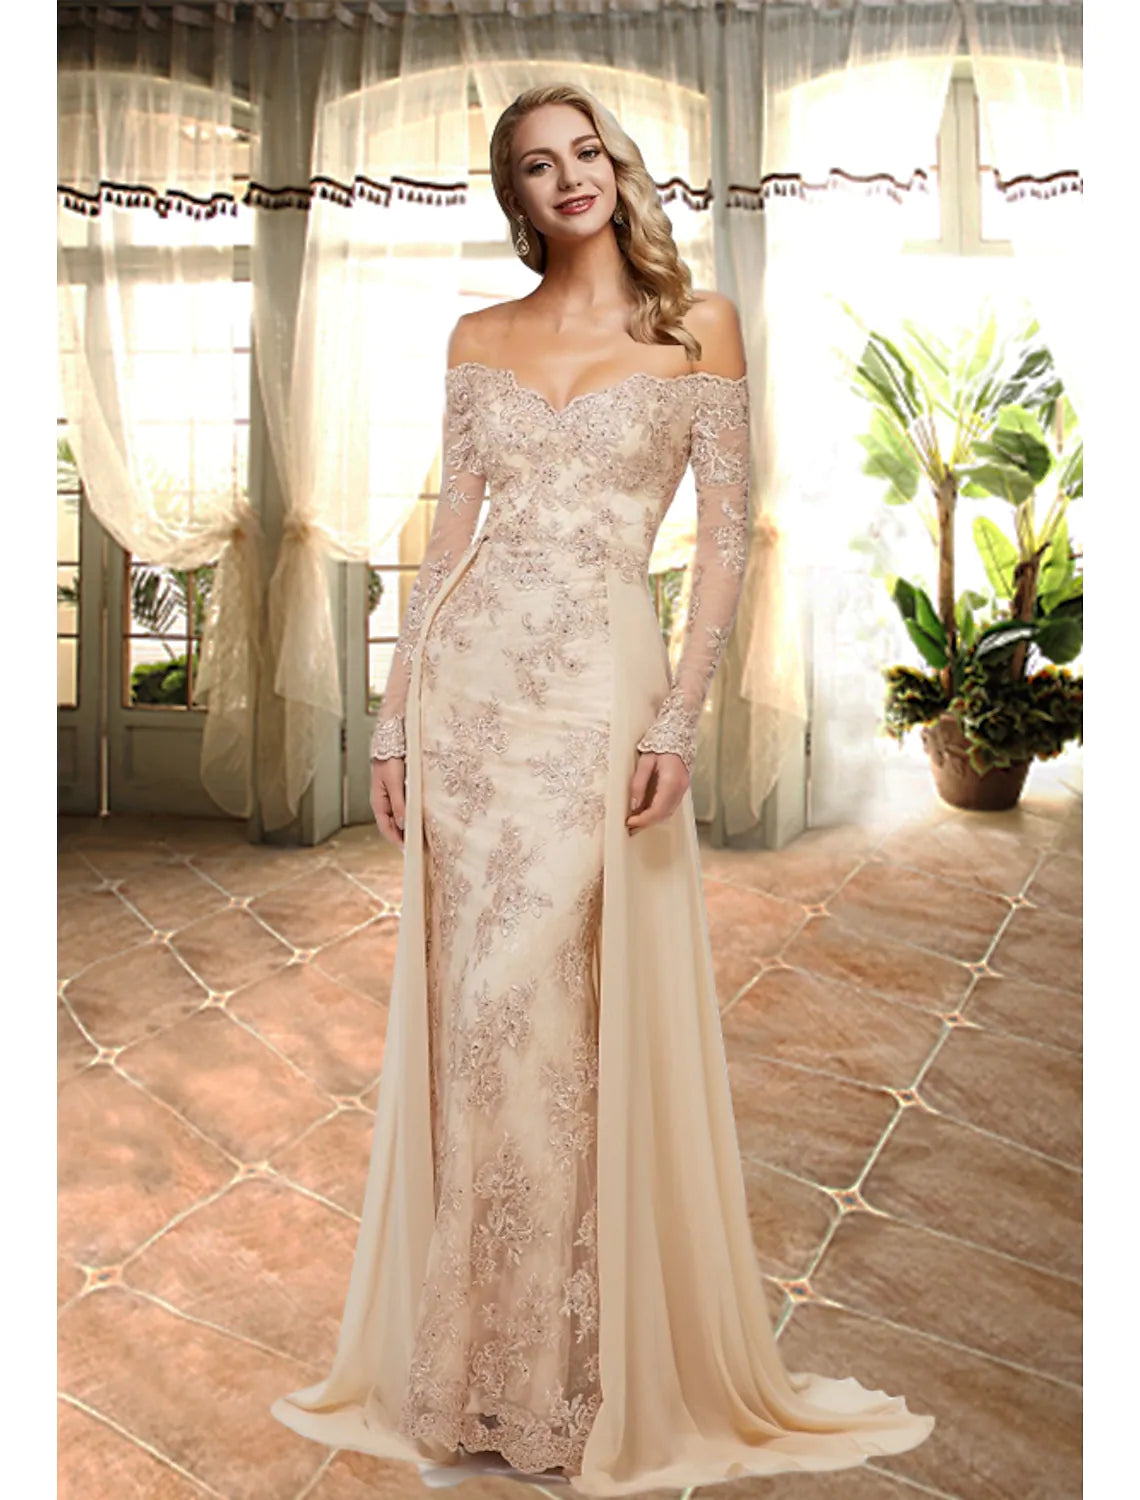 A-Line Prom Dress Long Off Shoulder Luxurious Elegant Engagement Formal Evening Gown Sweetheart Neckline Long Sleeve Lace